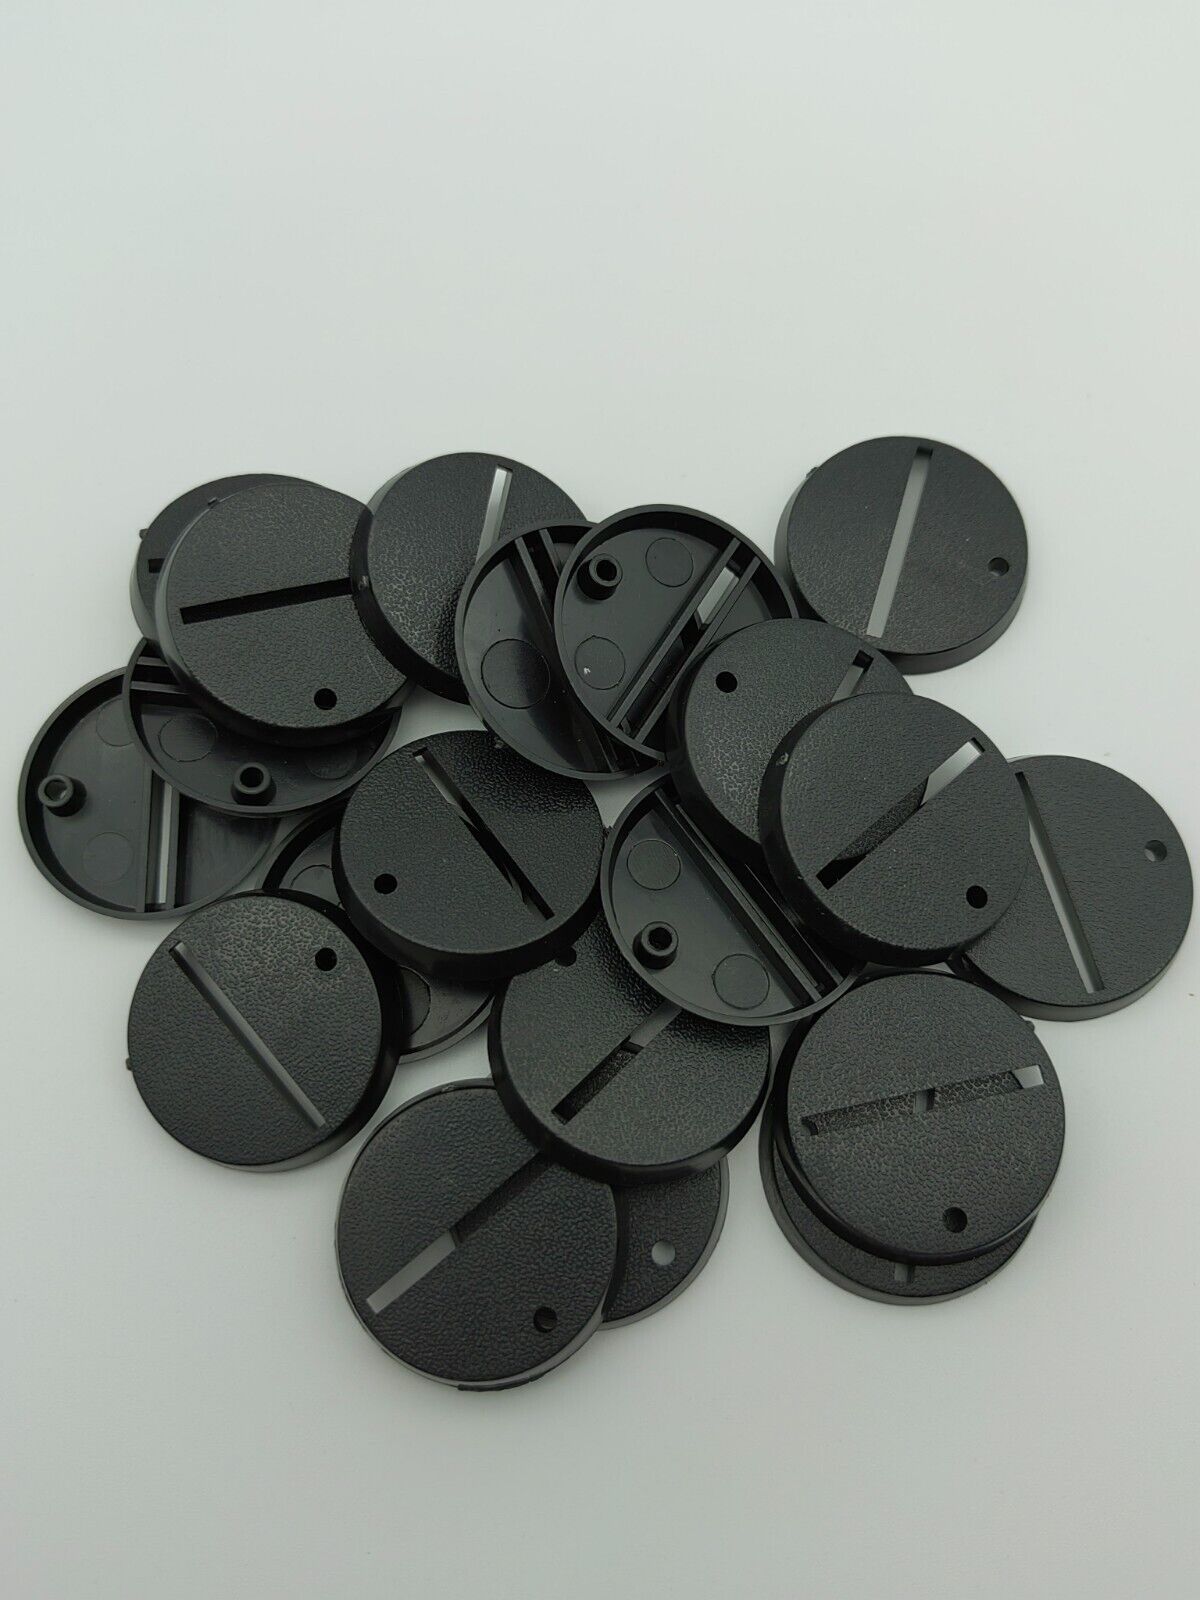 Lot Of 20 32mm Round SLOT Bases Used For Warhammer 40k + AoS Games Workshop   War Base West Does not apply